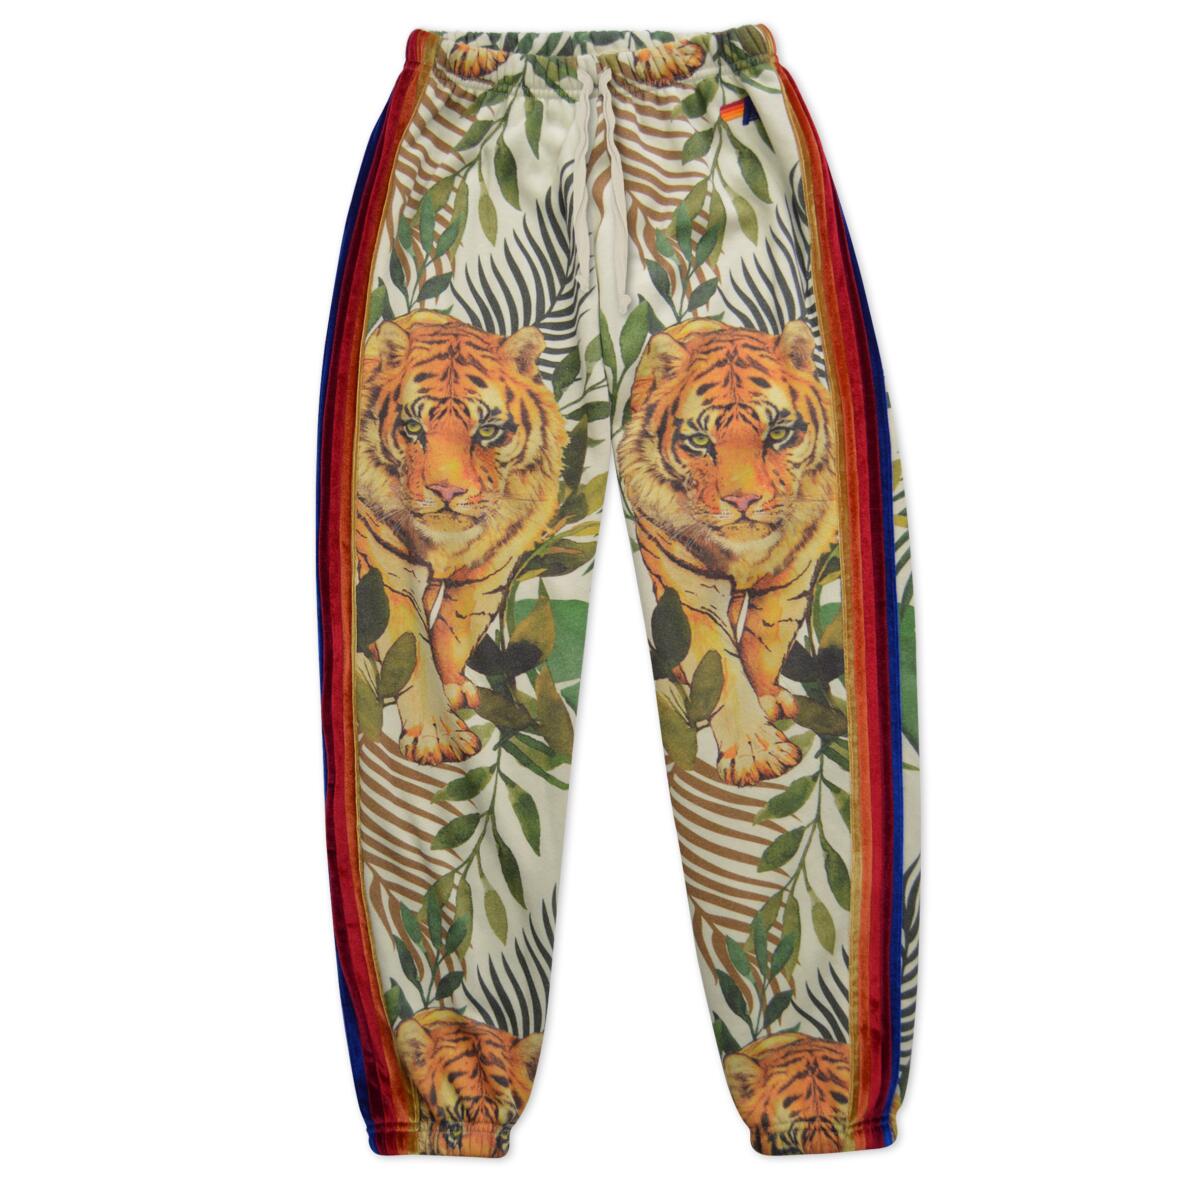 Sweatpants with a tiger-and-leaf design